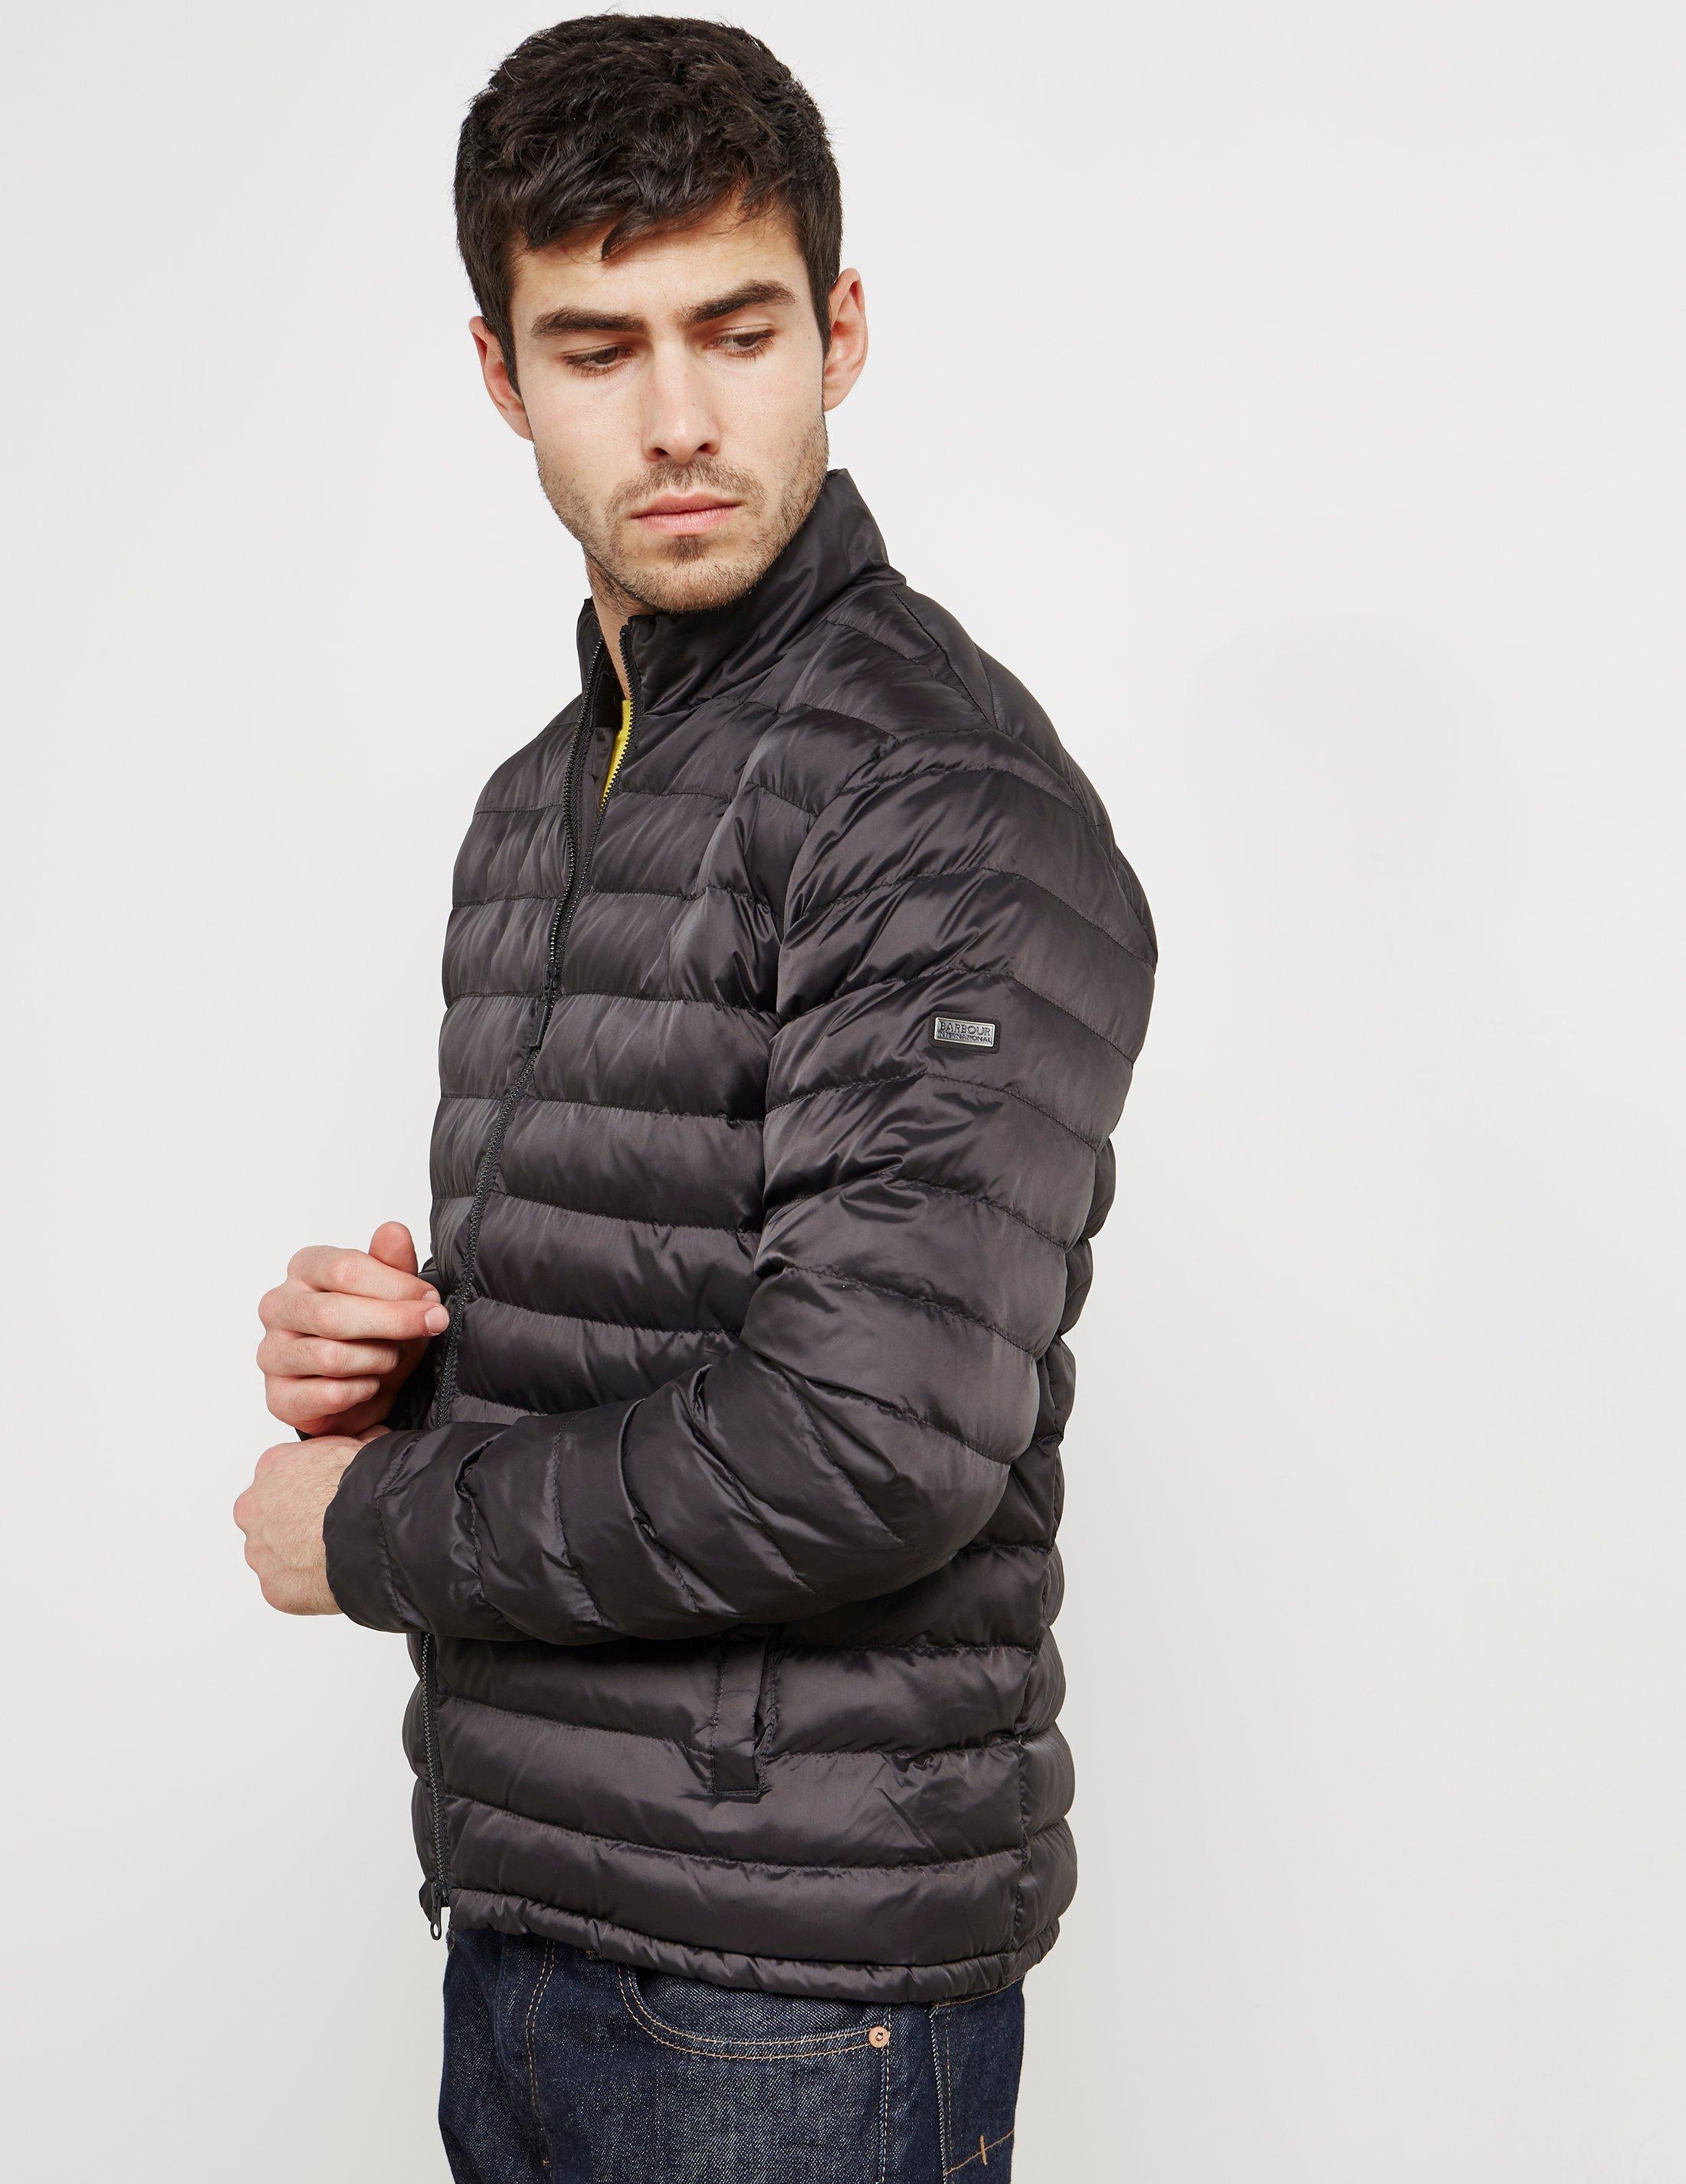 Barbour International Impeller Quilted Jacket Store, SAVE 60%.